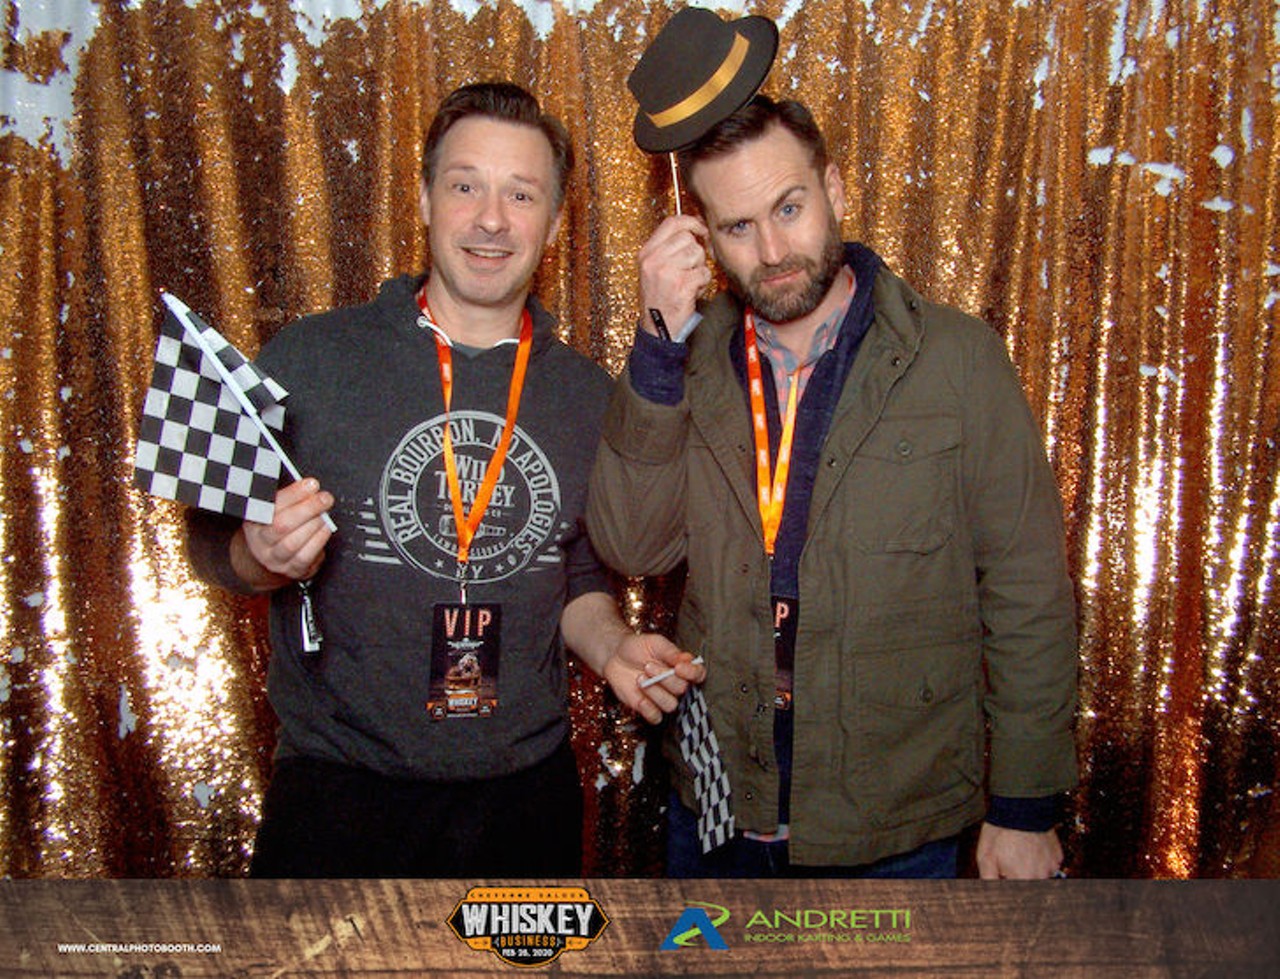 All the smiling faces at Whiskey Business 2020 Andretti Indoor Karting photo booth!